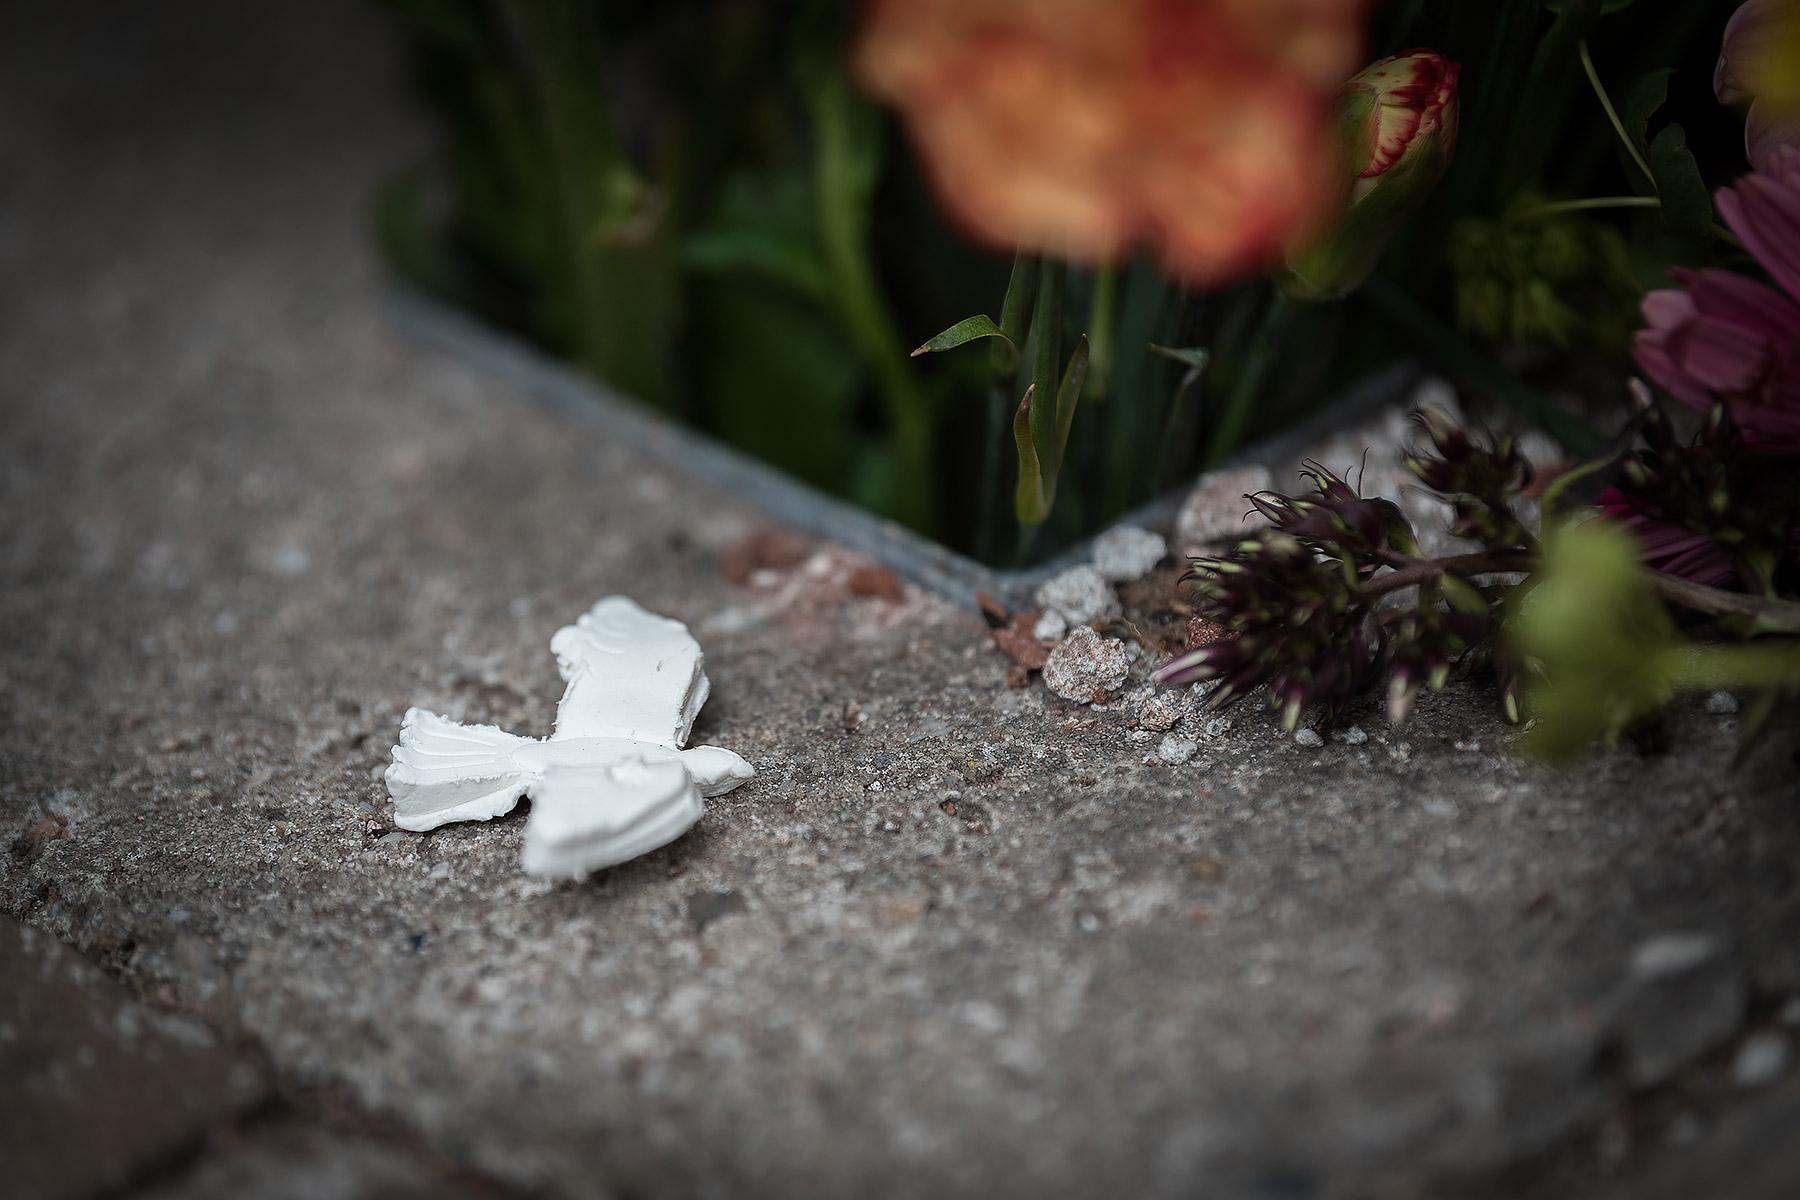 A peace dove and flowers at a monument in Amsterdam. Photo courtesy of Albin Hillert